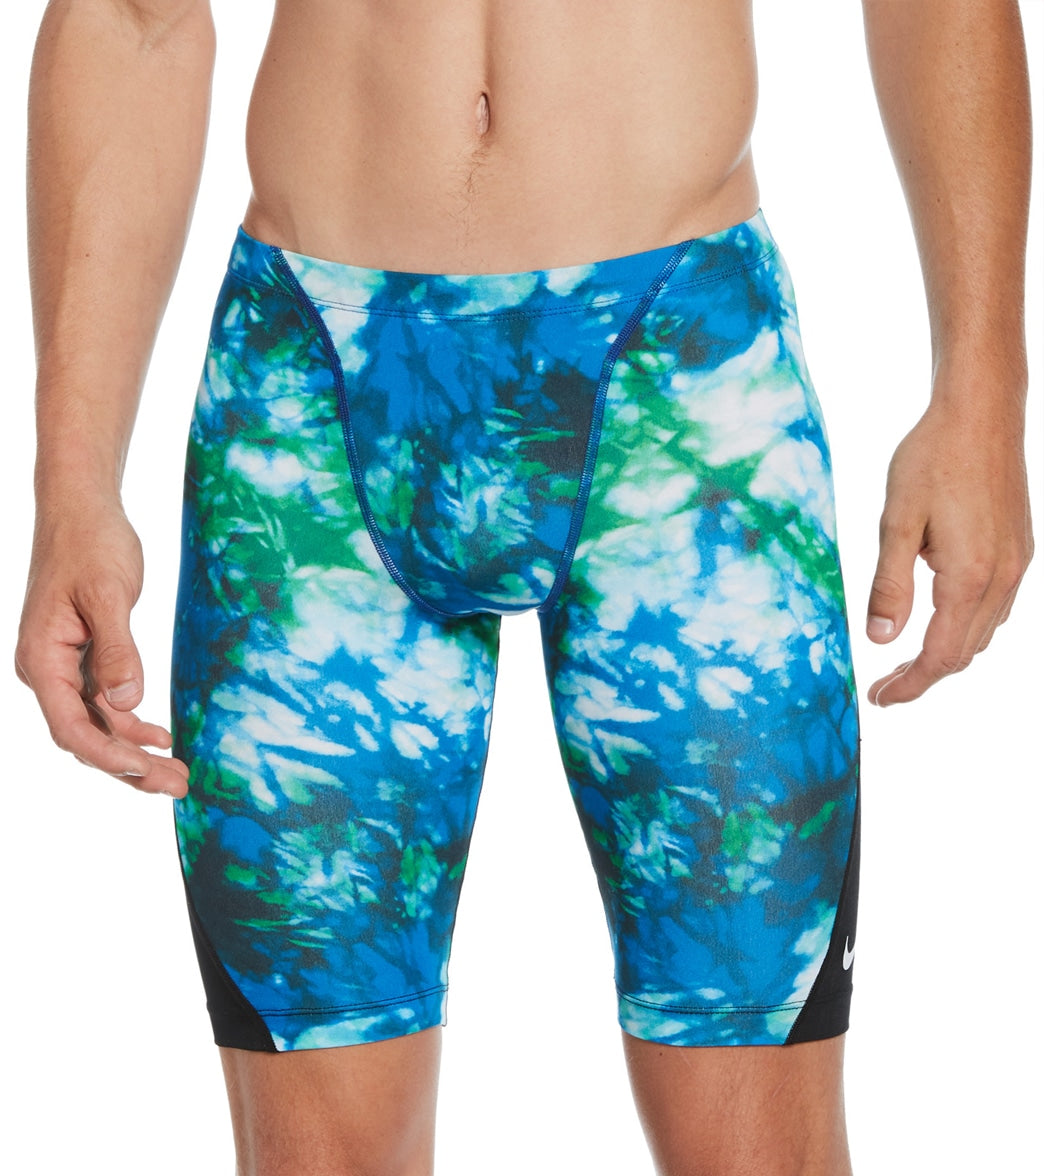 Nike Men's Hydrastrong Tie Dye Jammer Swimsuit Blue Green at SwimOutlet.com